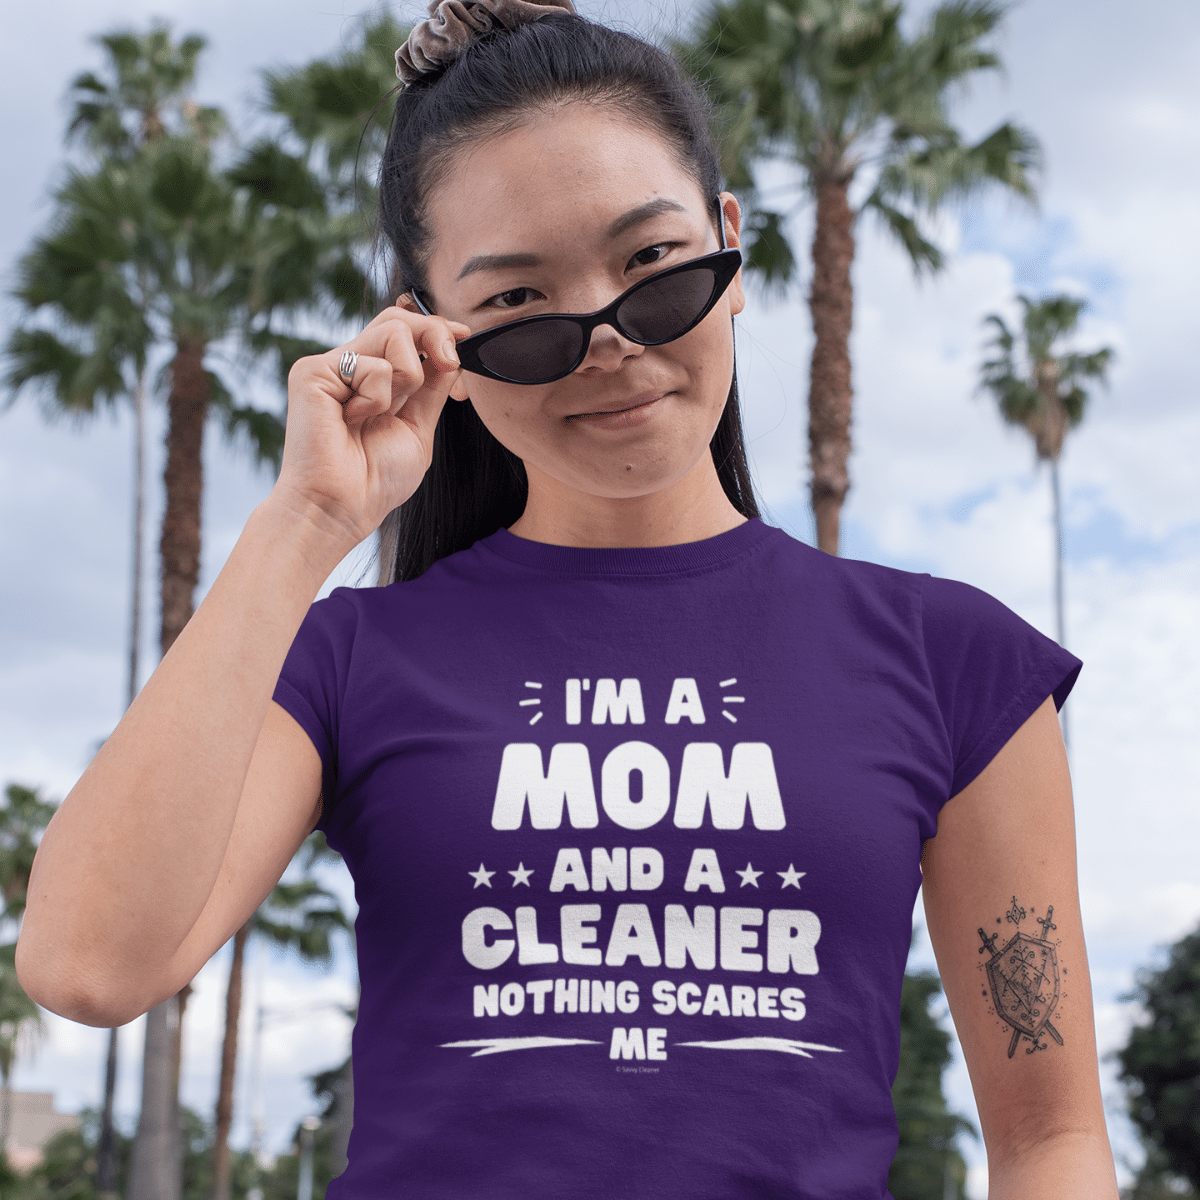 Mom and a Cleaner Savvy Cleaner Funny Cleaning Shirts Standard Tee